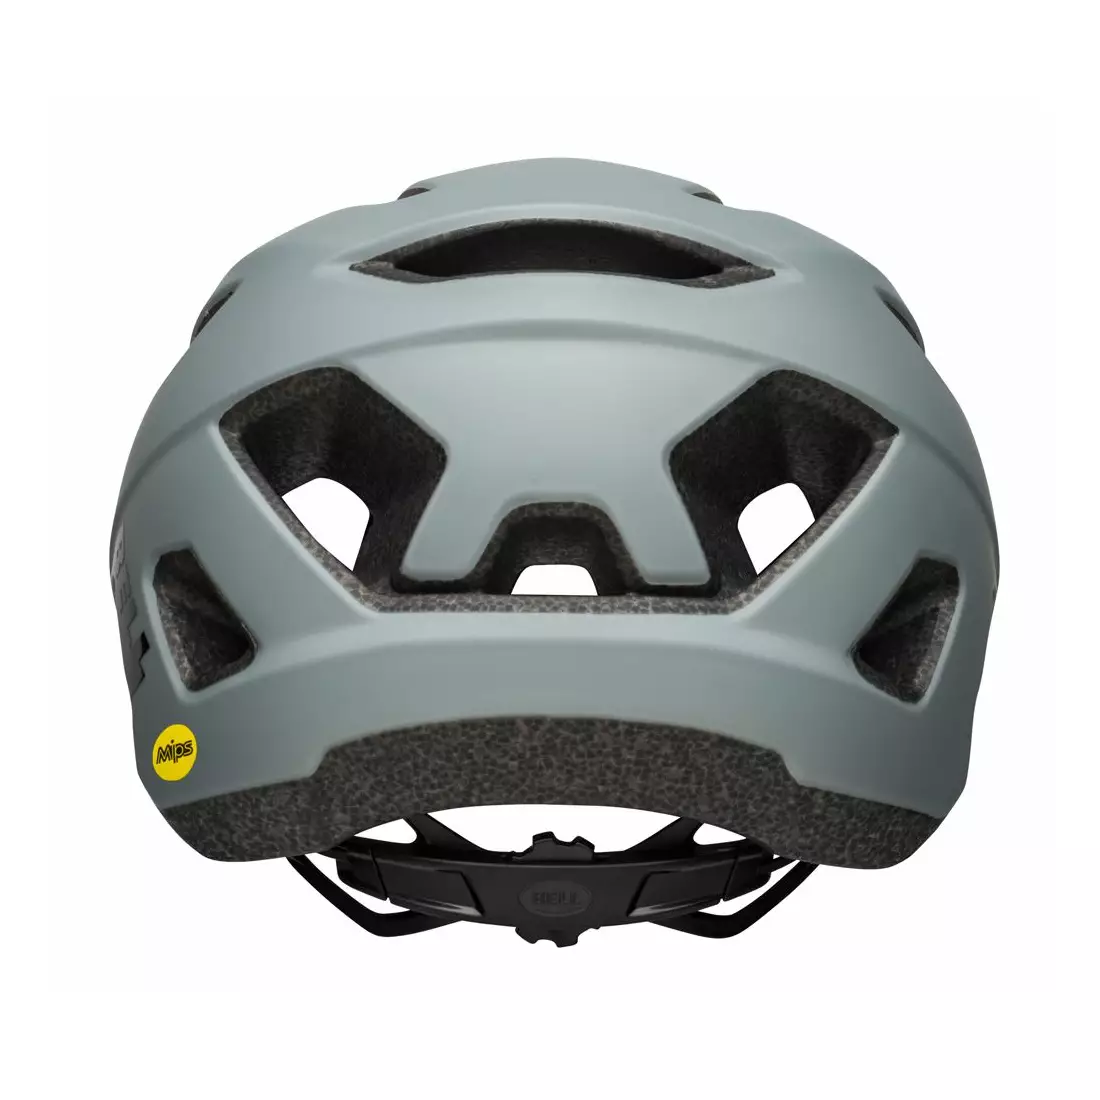 BELL kask rowerowy mtb NOMAD INTEGRATED MIPS matte gray black BEL-7128257